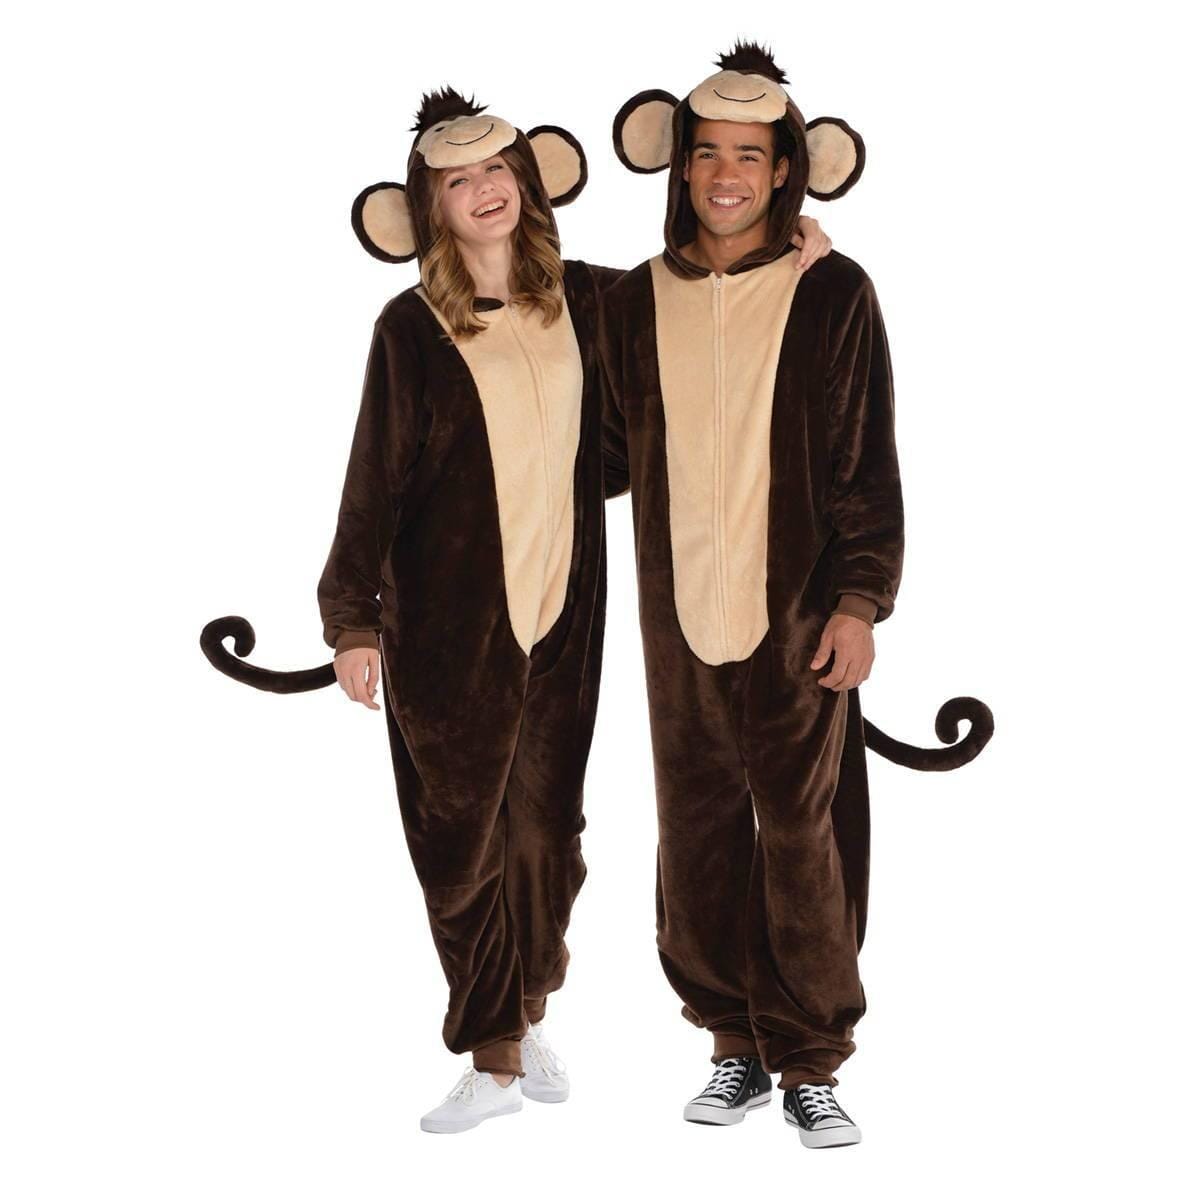 Buy Costumes Monkey Zipster Costume for Adults sold at Party Expert